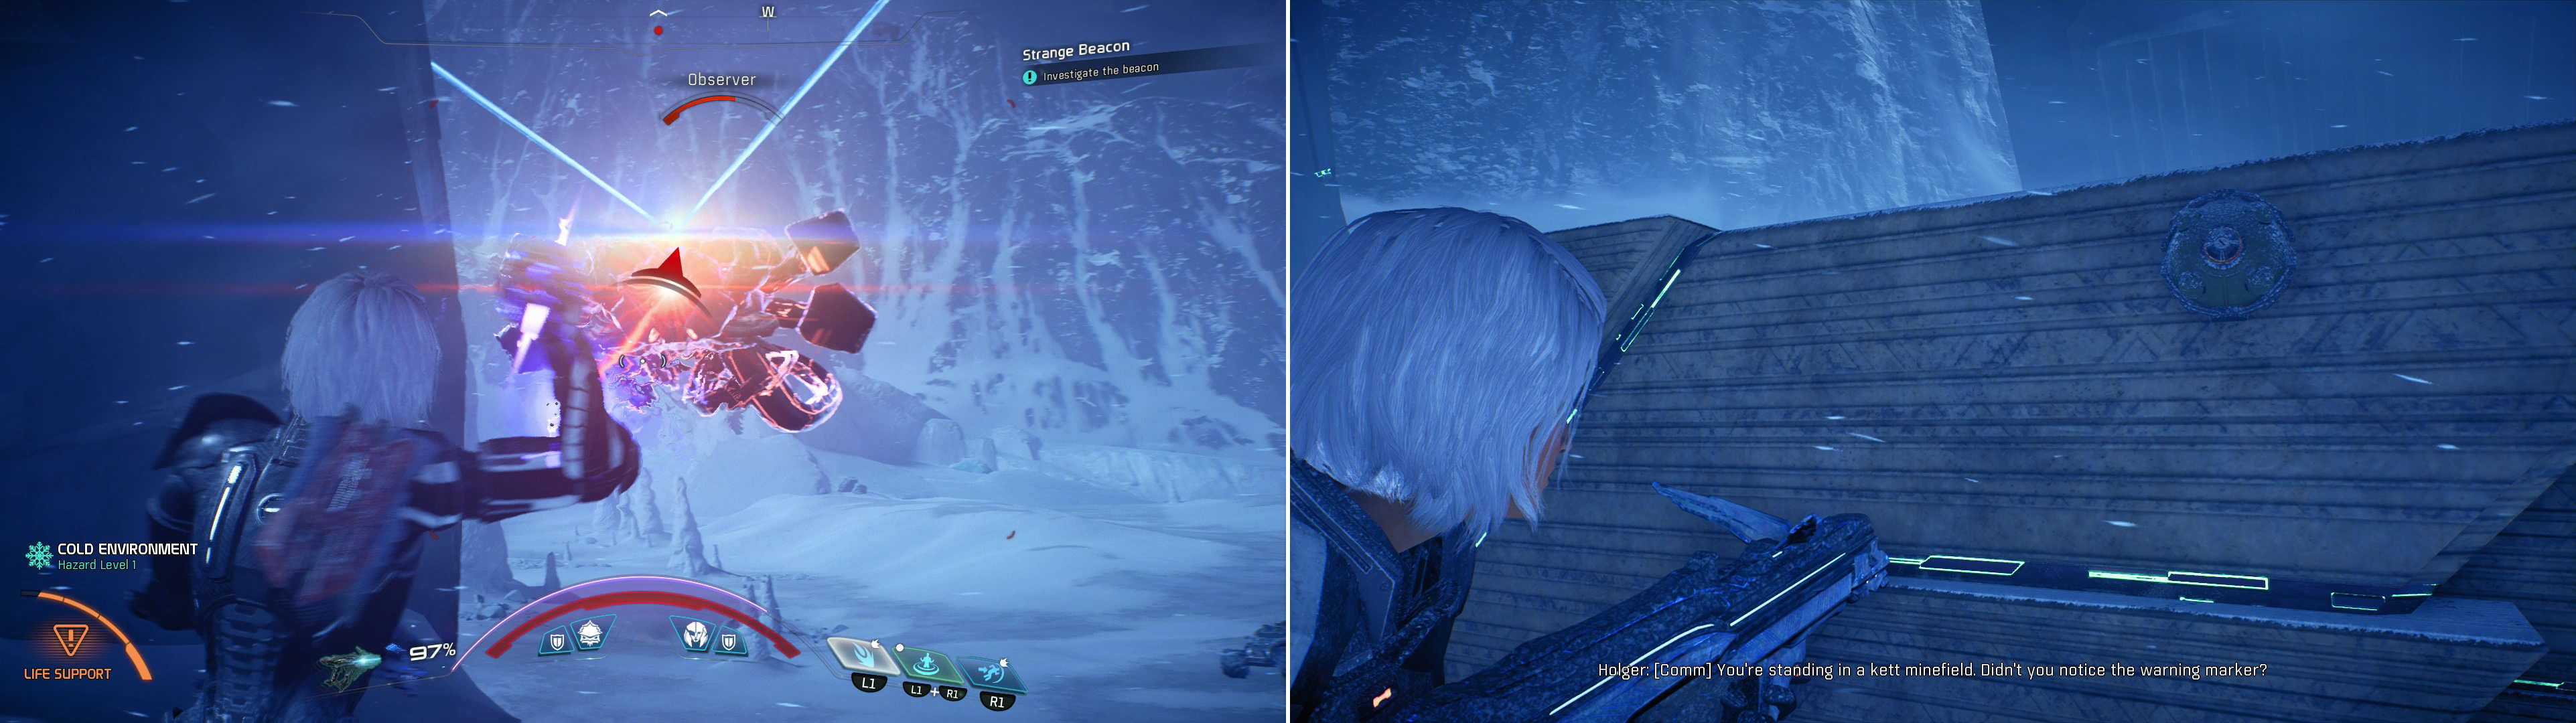 Kill the Remnant near some ruins (left) then interact with a Strange Beacon to get some startling news (right).